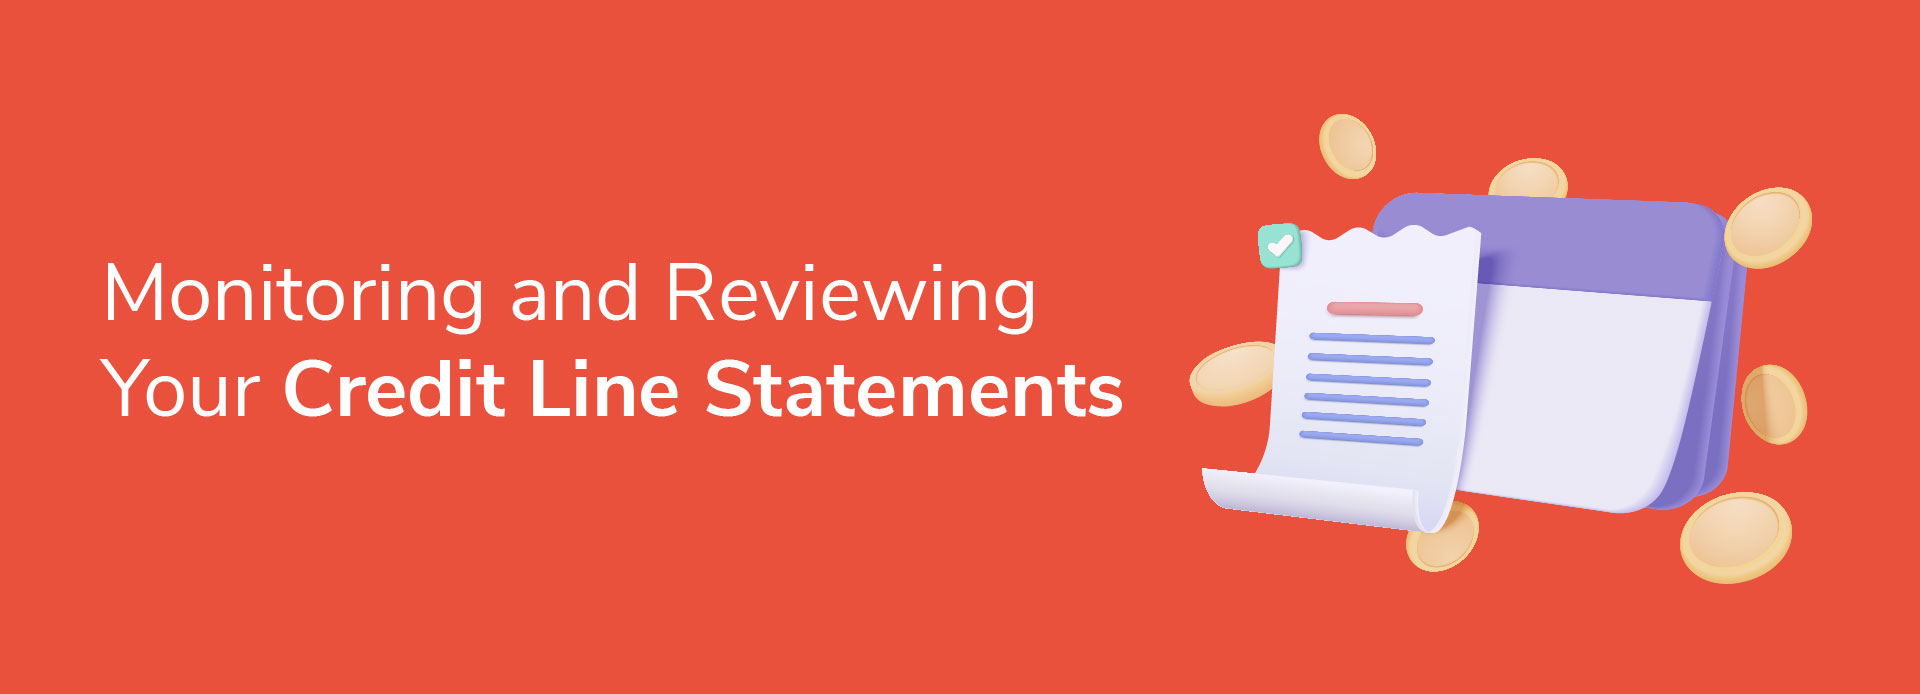 Tips for Monitoring and Reviewing Your Credit Line Statements